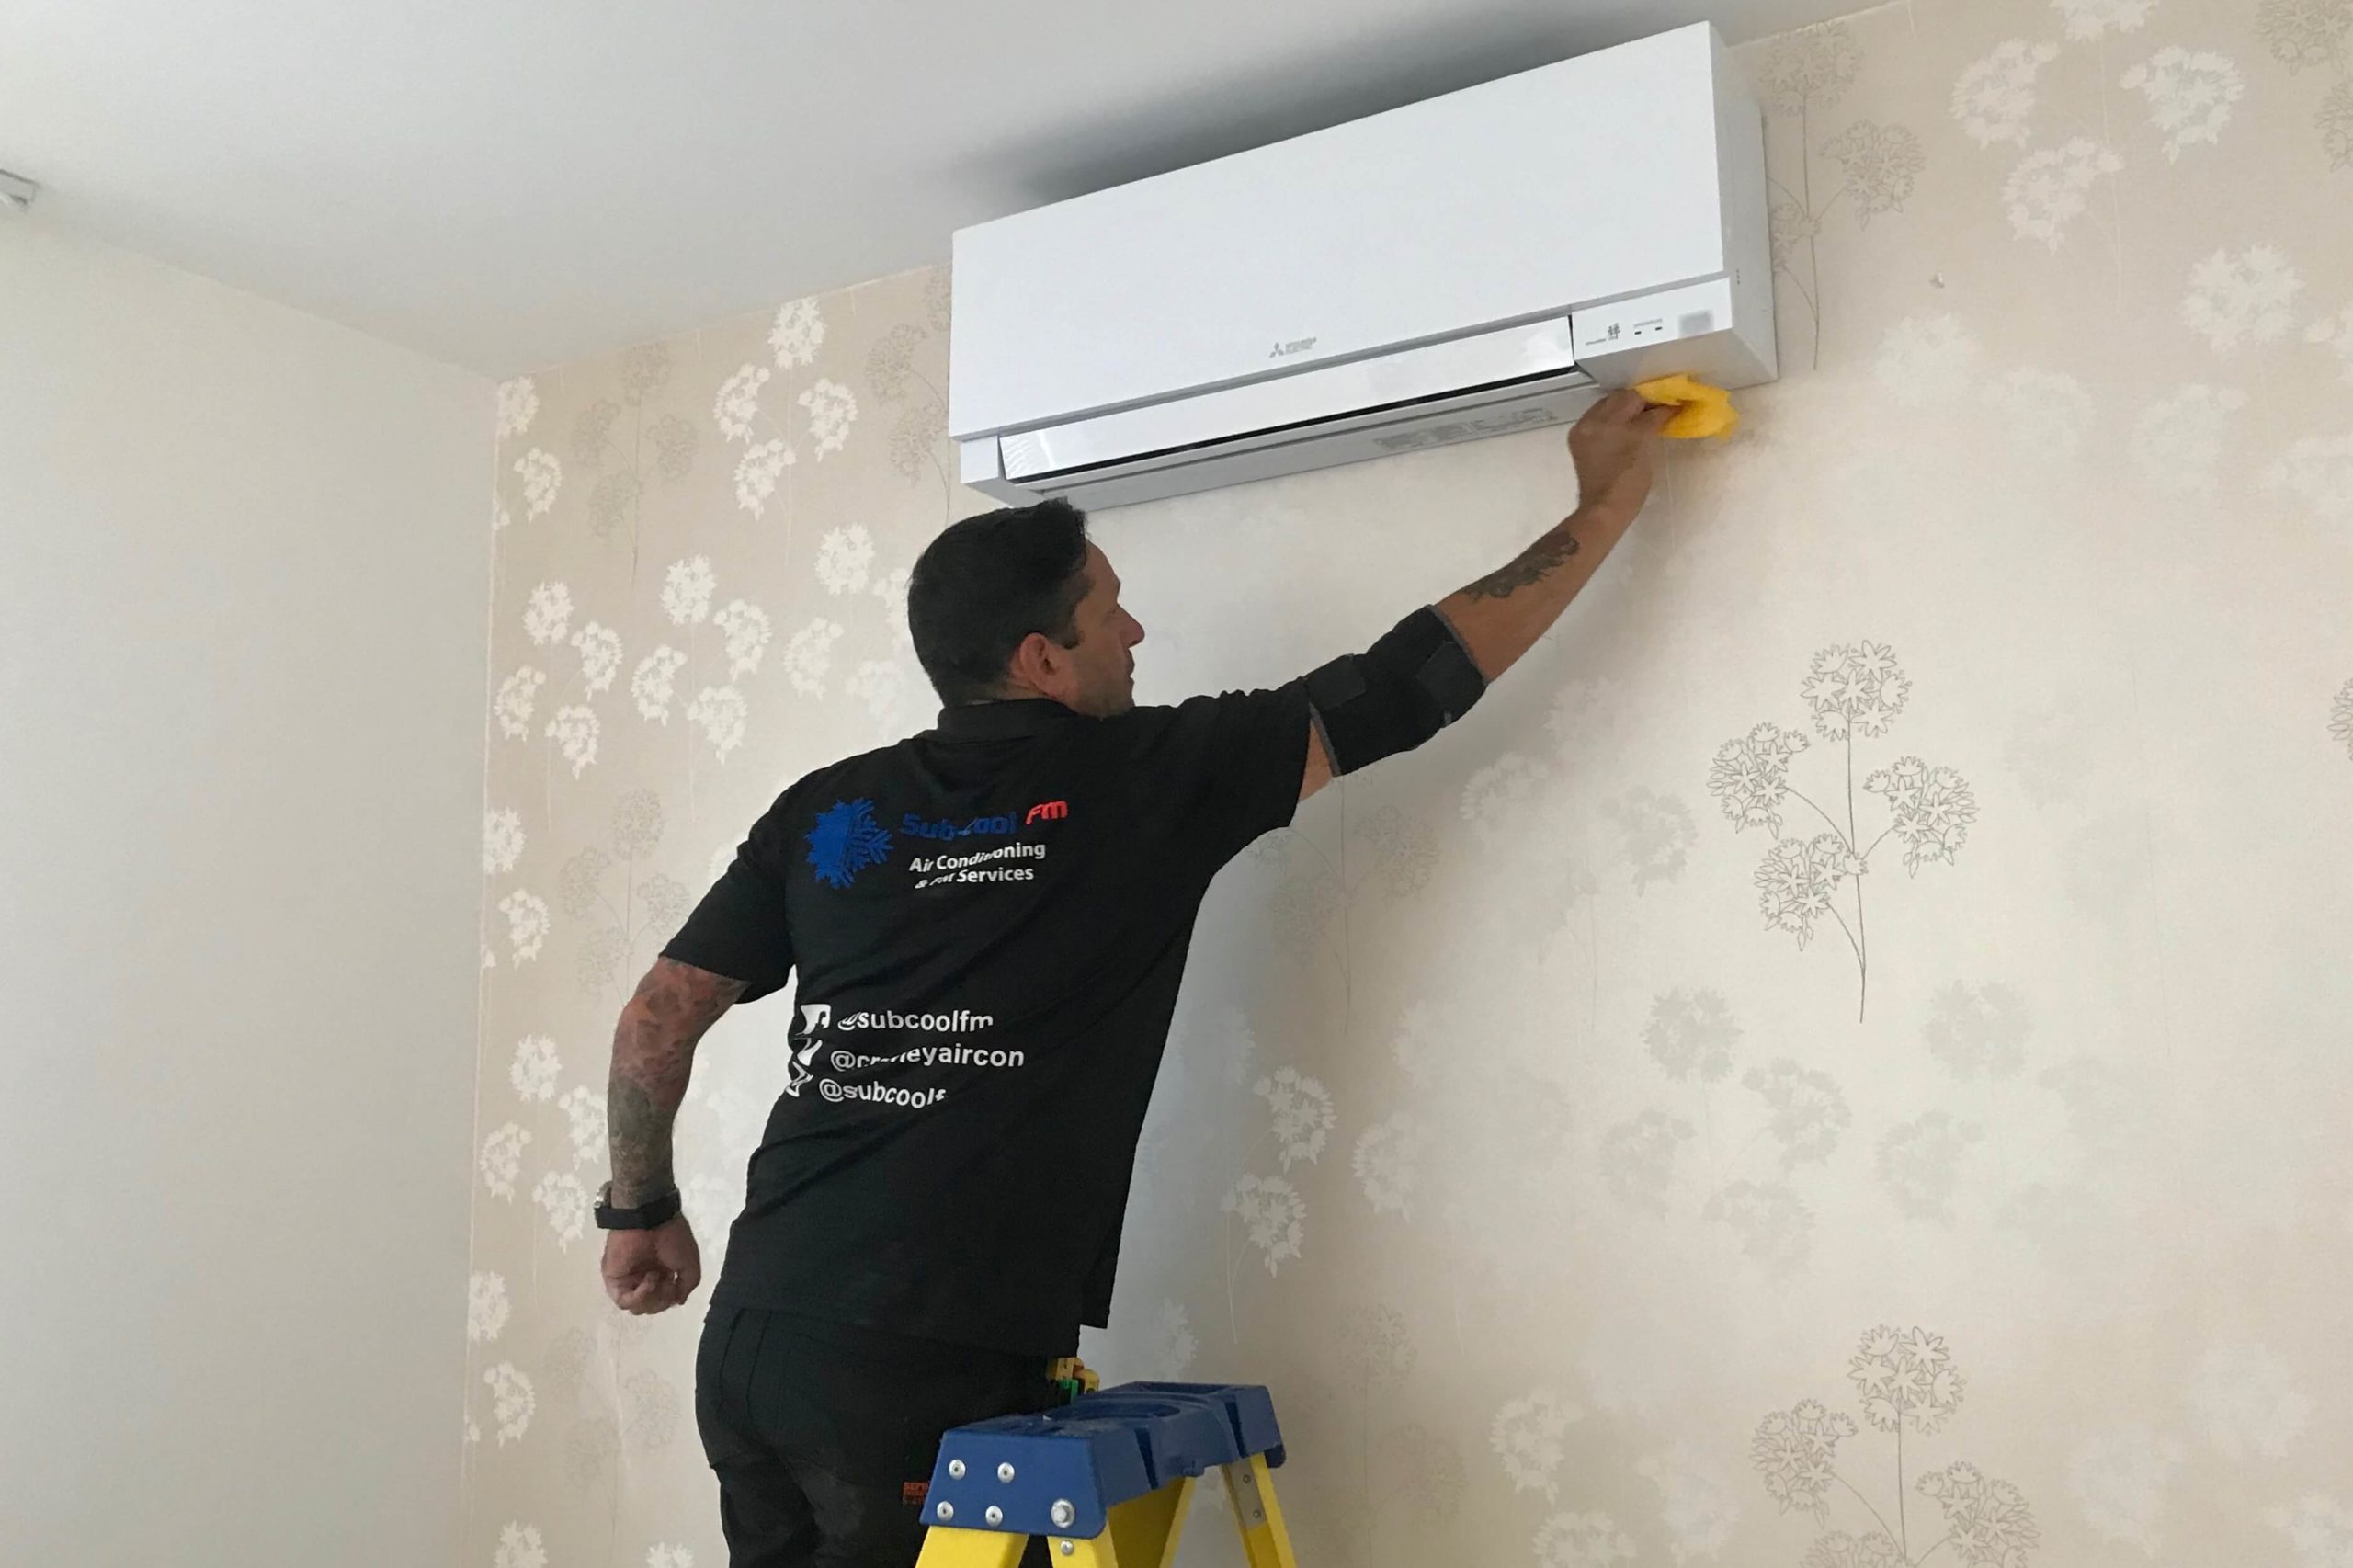 SubCool FM engineer working on white Mitsubishi Electric wall mounted air conditioning unit